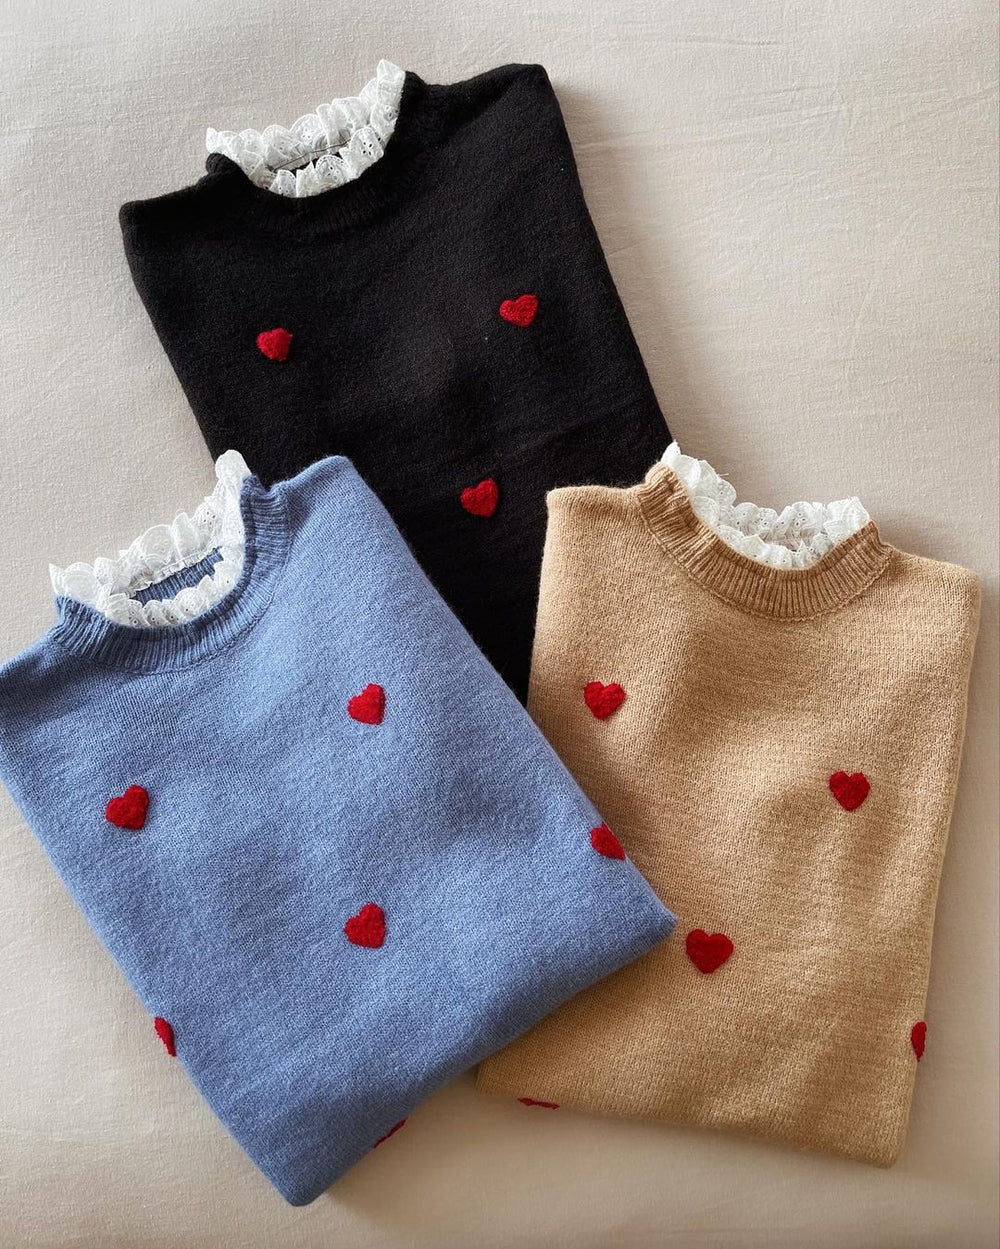 Floating Red Heart Black Round Neck Sweater